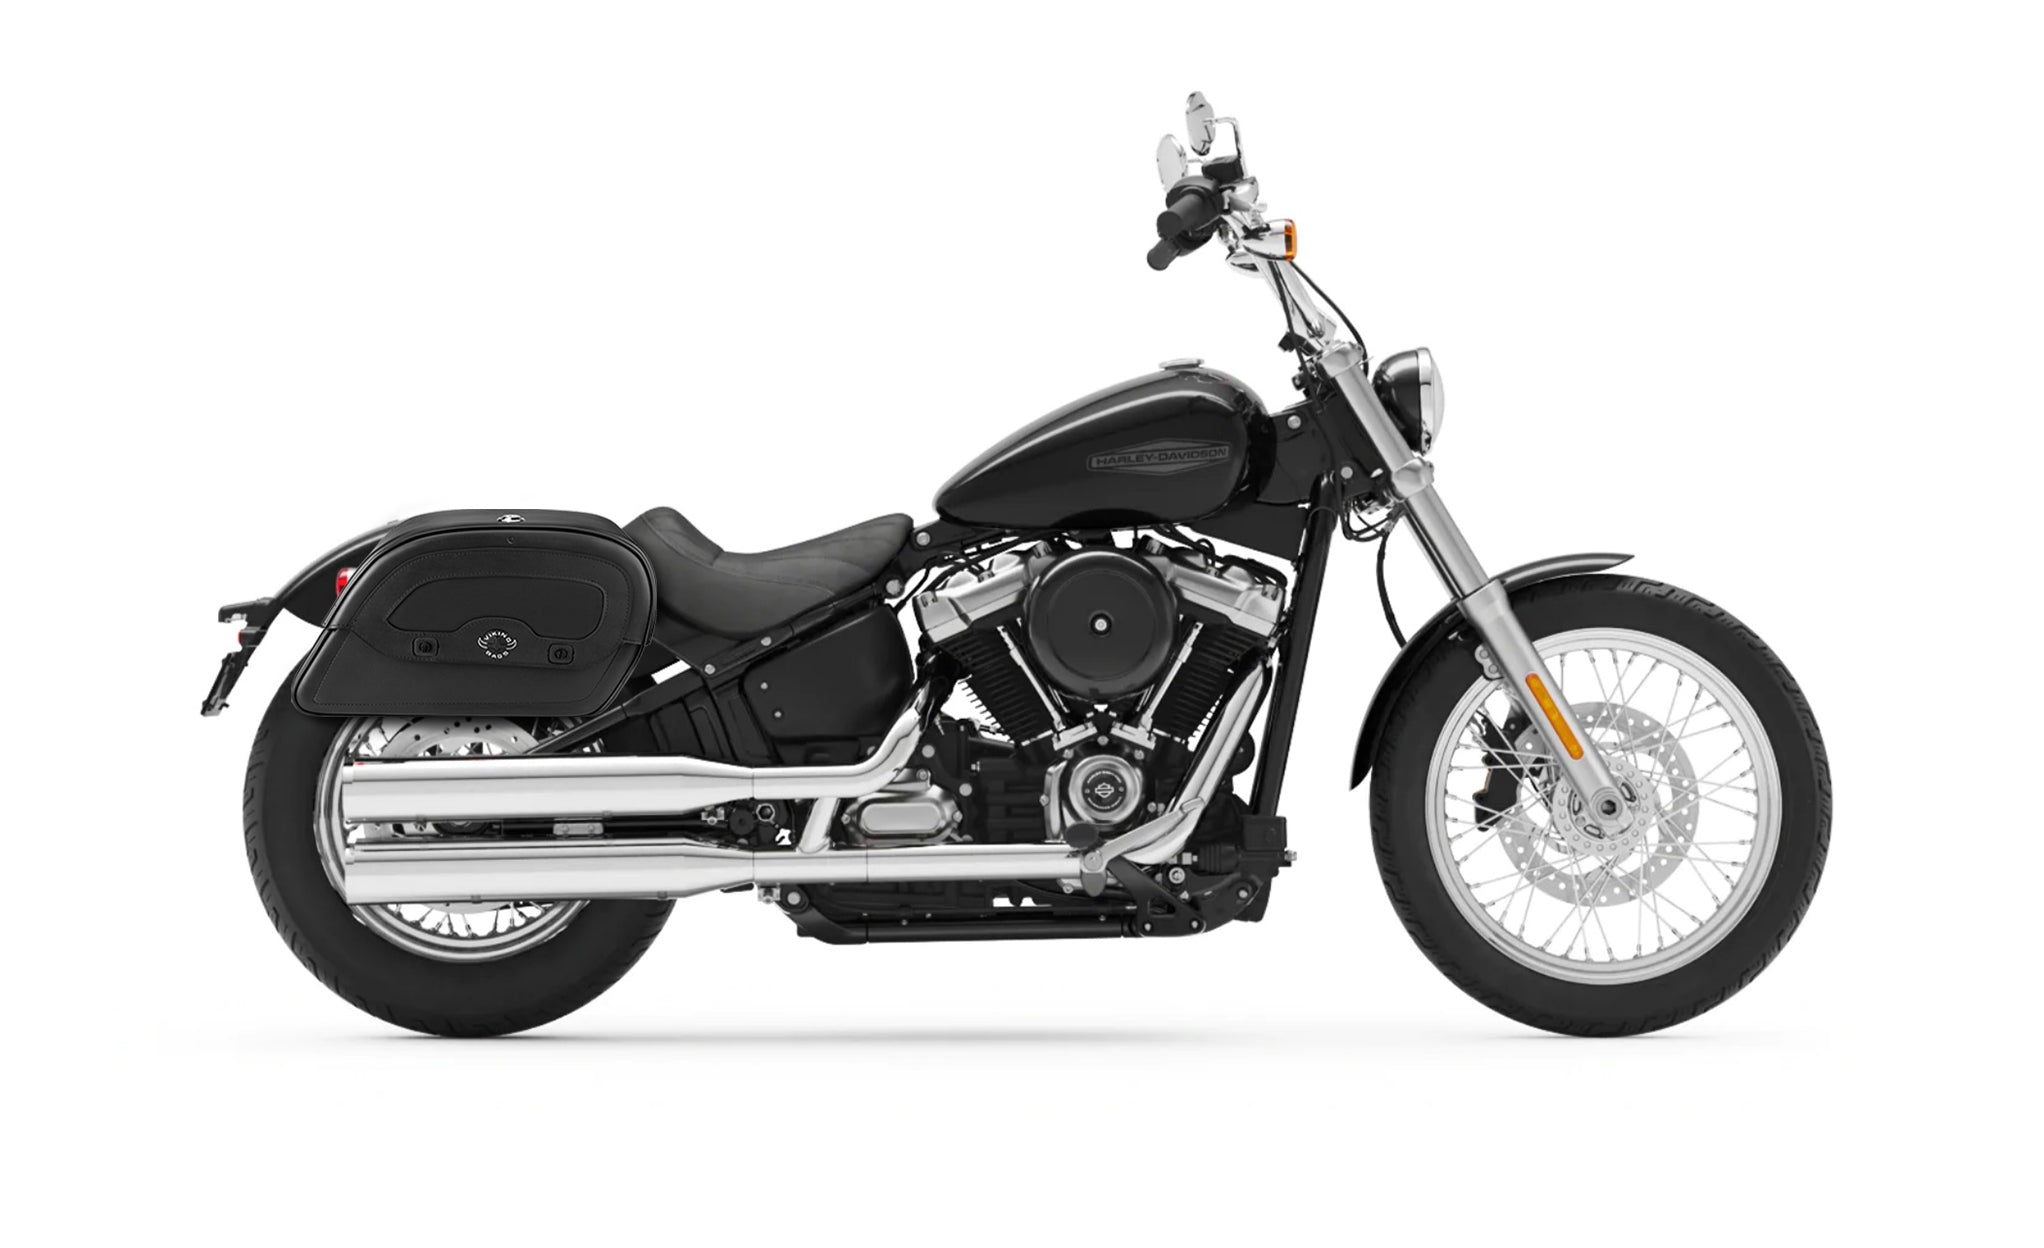 22L - Warrior Medium Quick-Mount Motorcycle Saddlebags For Harley Softail Standard FXST @expand